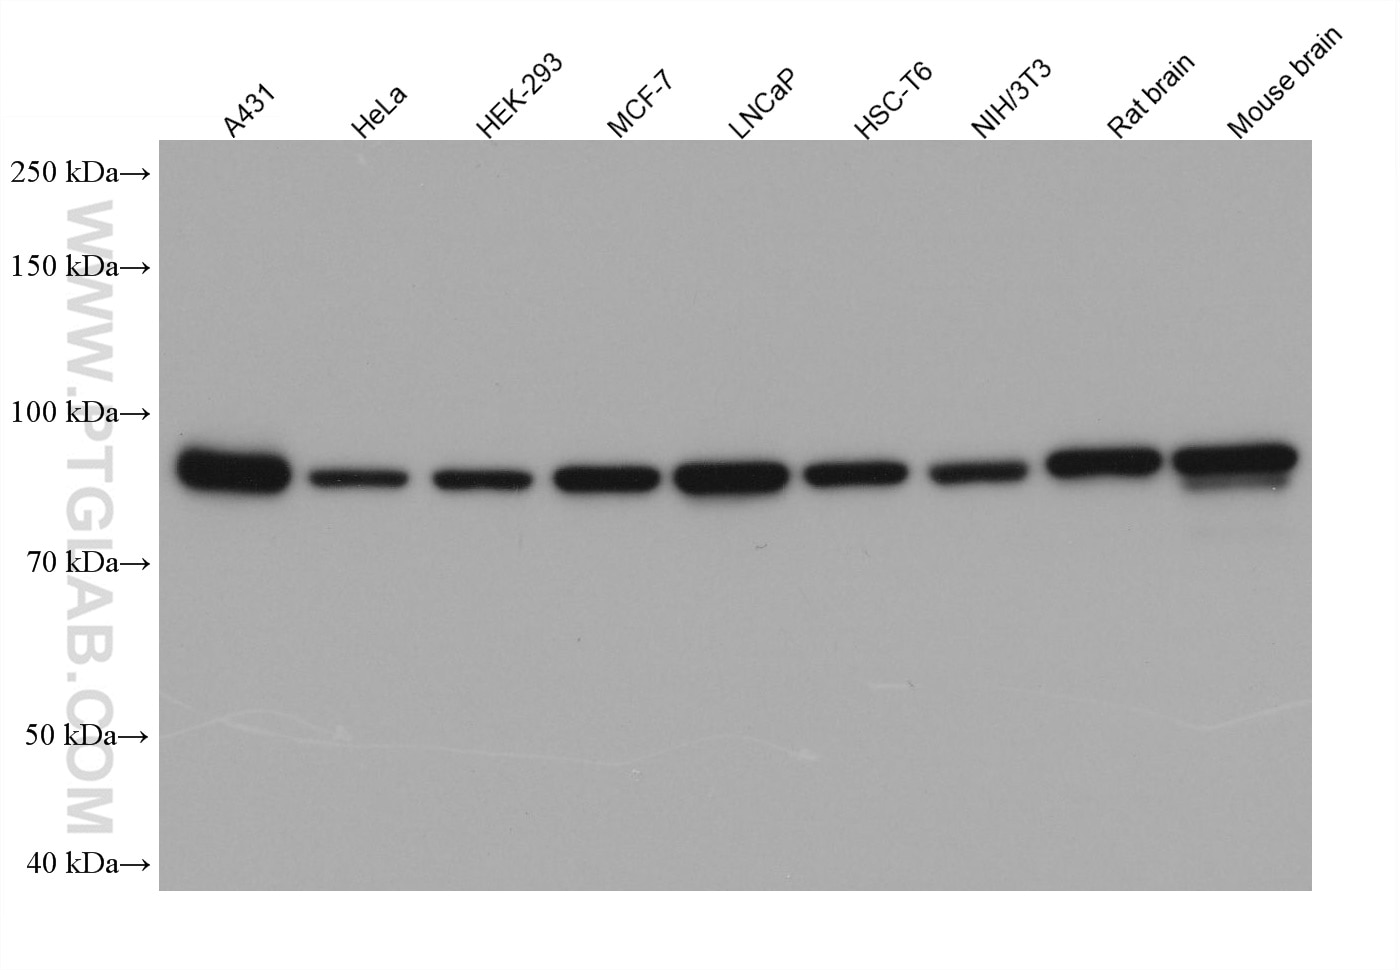 Various lysates were subjected to SDS-PAGE followed by western blot with rabbit anti-Beta Catenin polyclonal antibody (51067-2-AP) at dilution of 1:50000. Multi-rAb HRP-Goat Anti-Rabbit Recombinant Secondary Antibody (H+L) (RGAR001) was used at 1:20000 for detection.